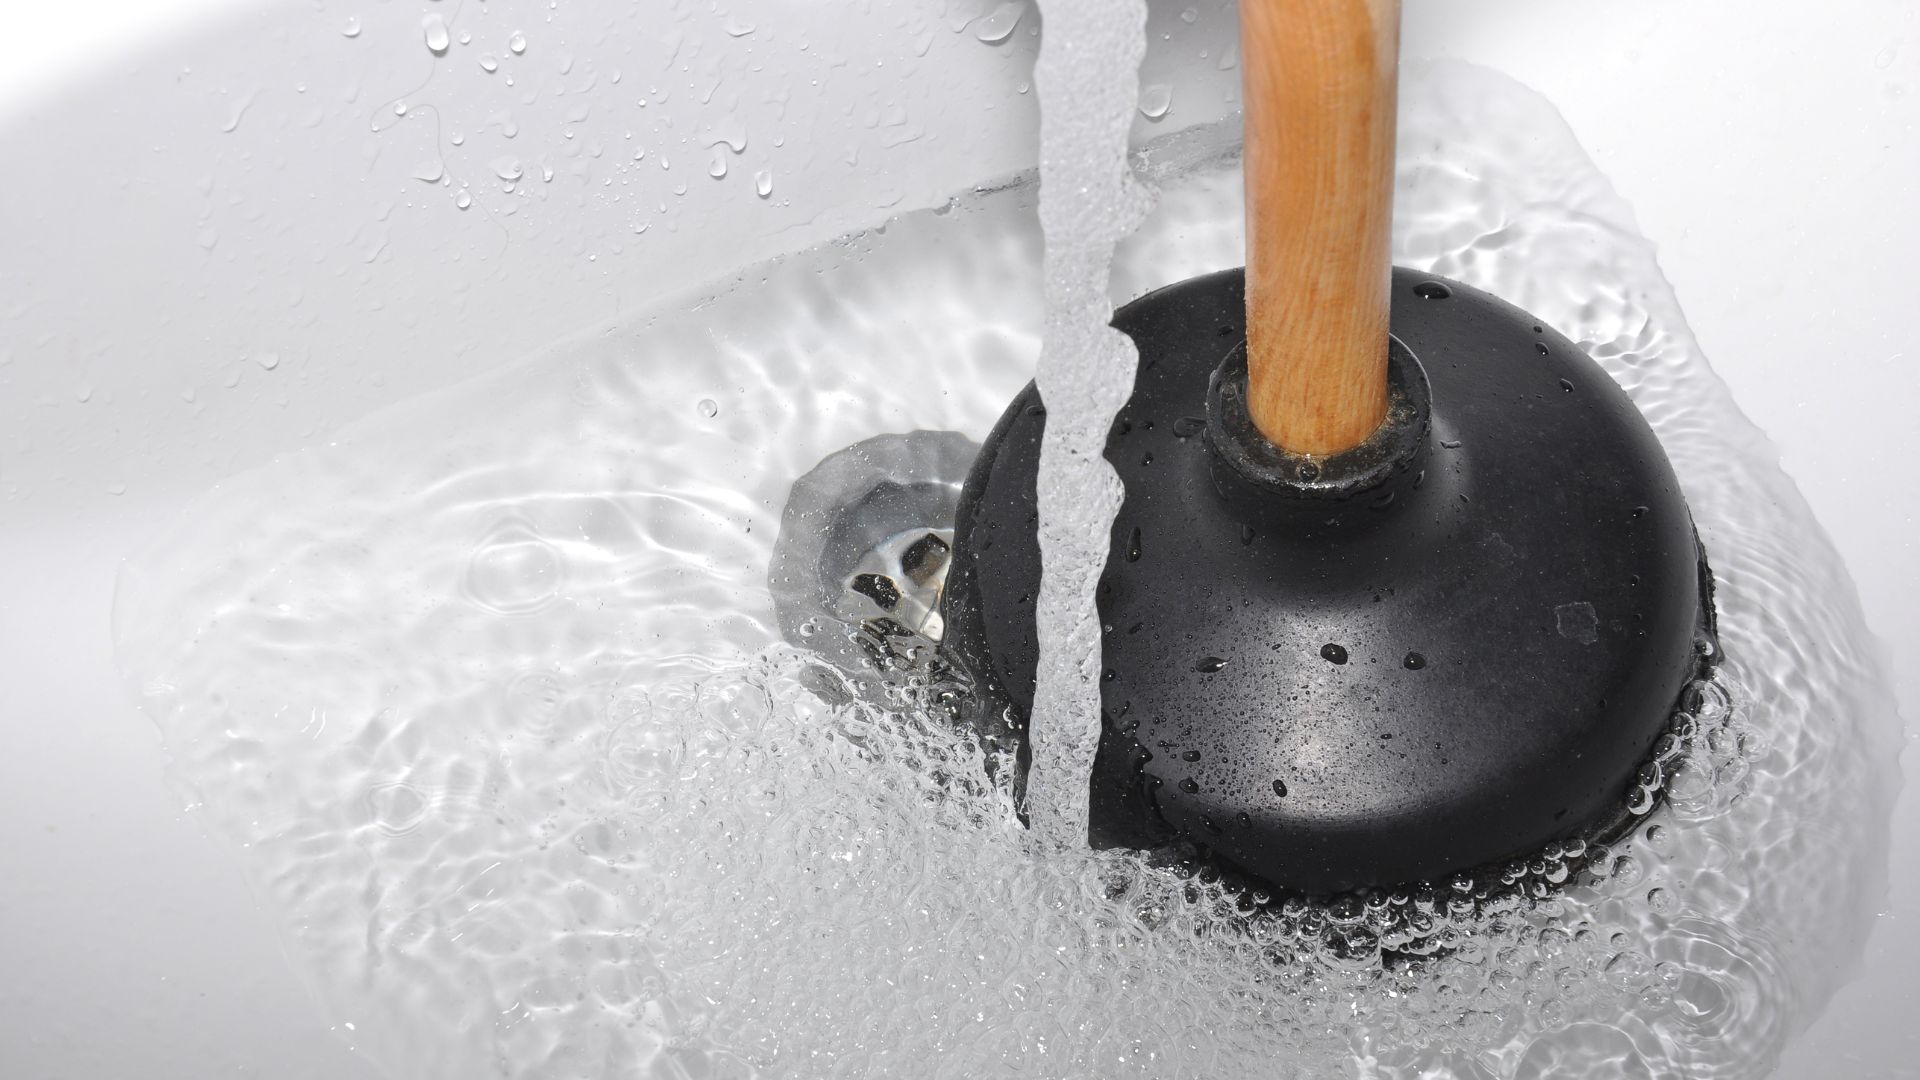 Service for cleaning drains, essential for plumbers to maintain optimal plumbing systems.